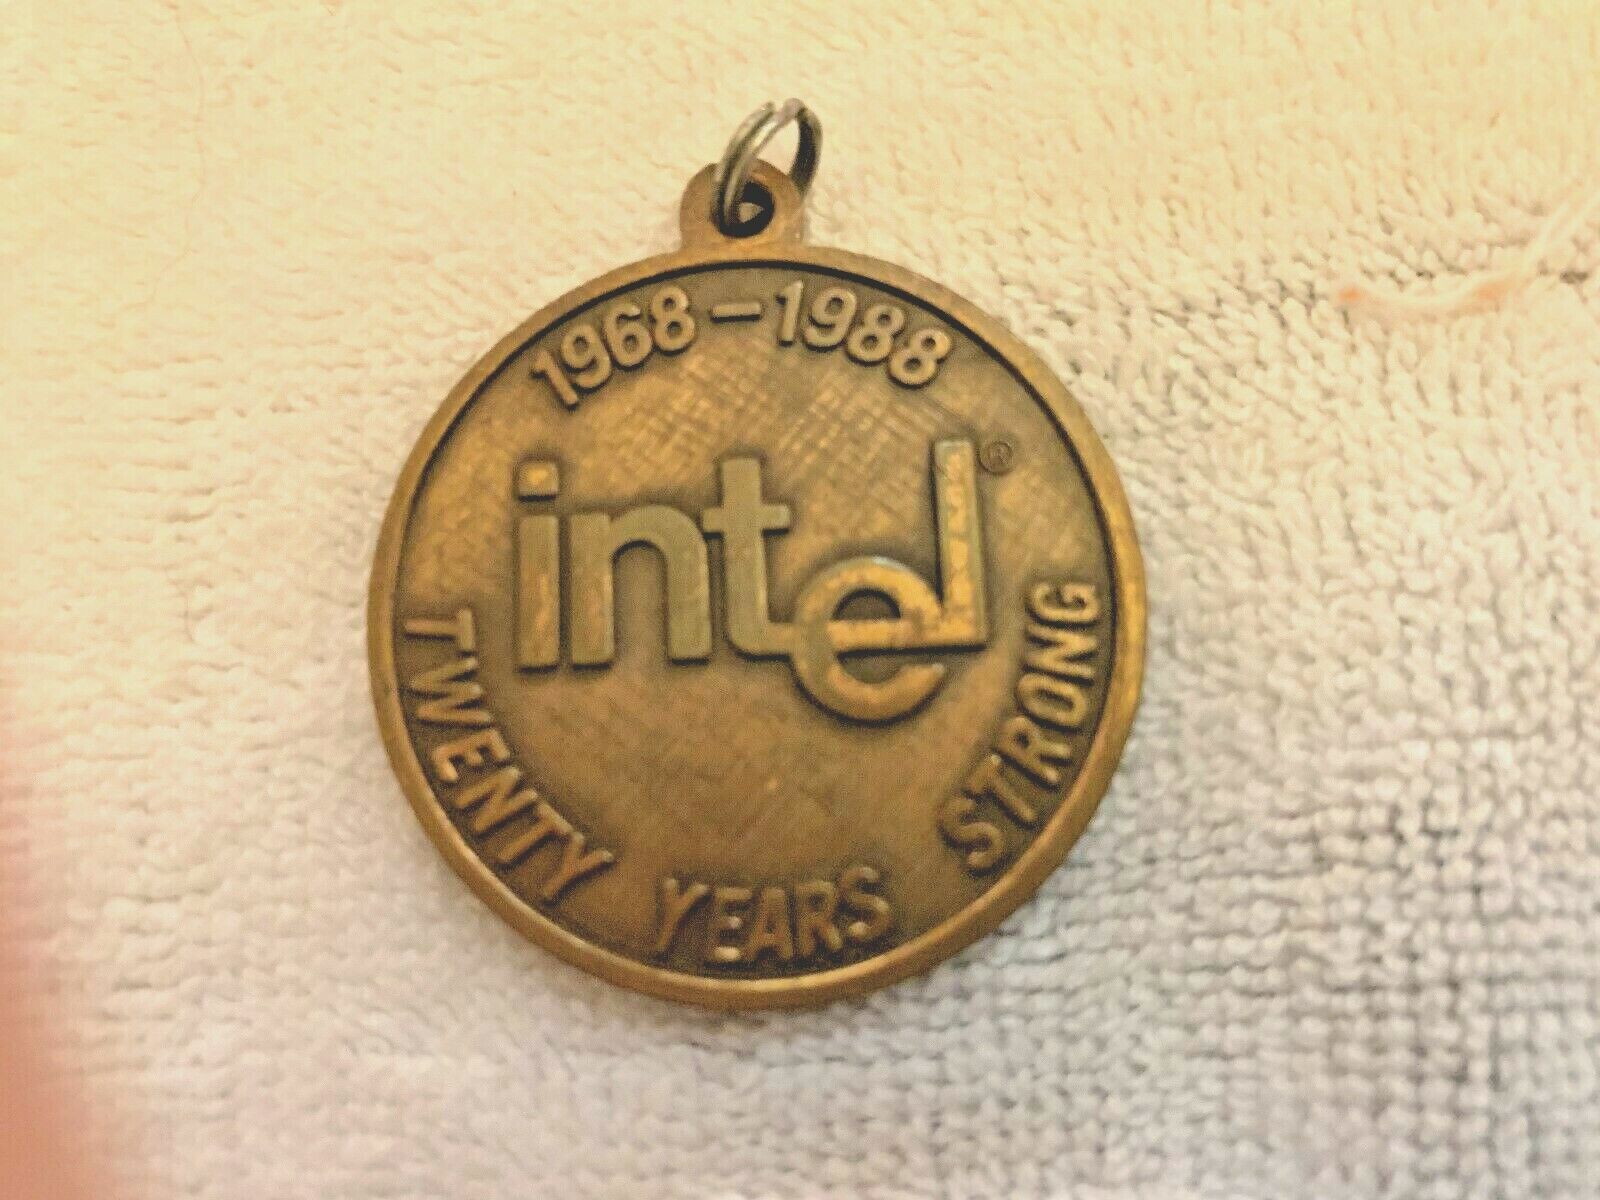 INTEL COIN 20 YEARS STRONG 1968-1988 RARE COLLECTIBLE